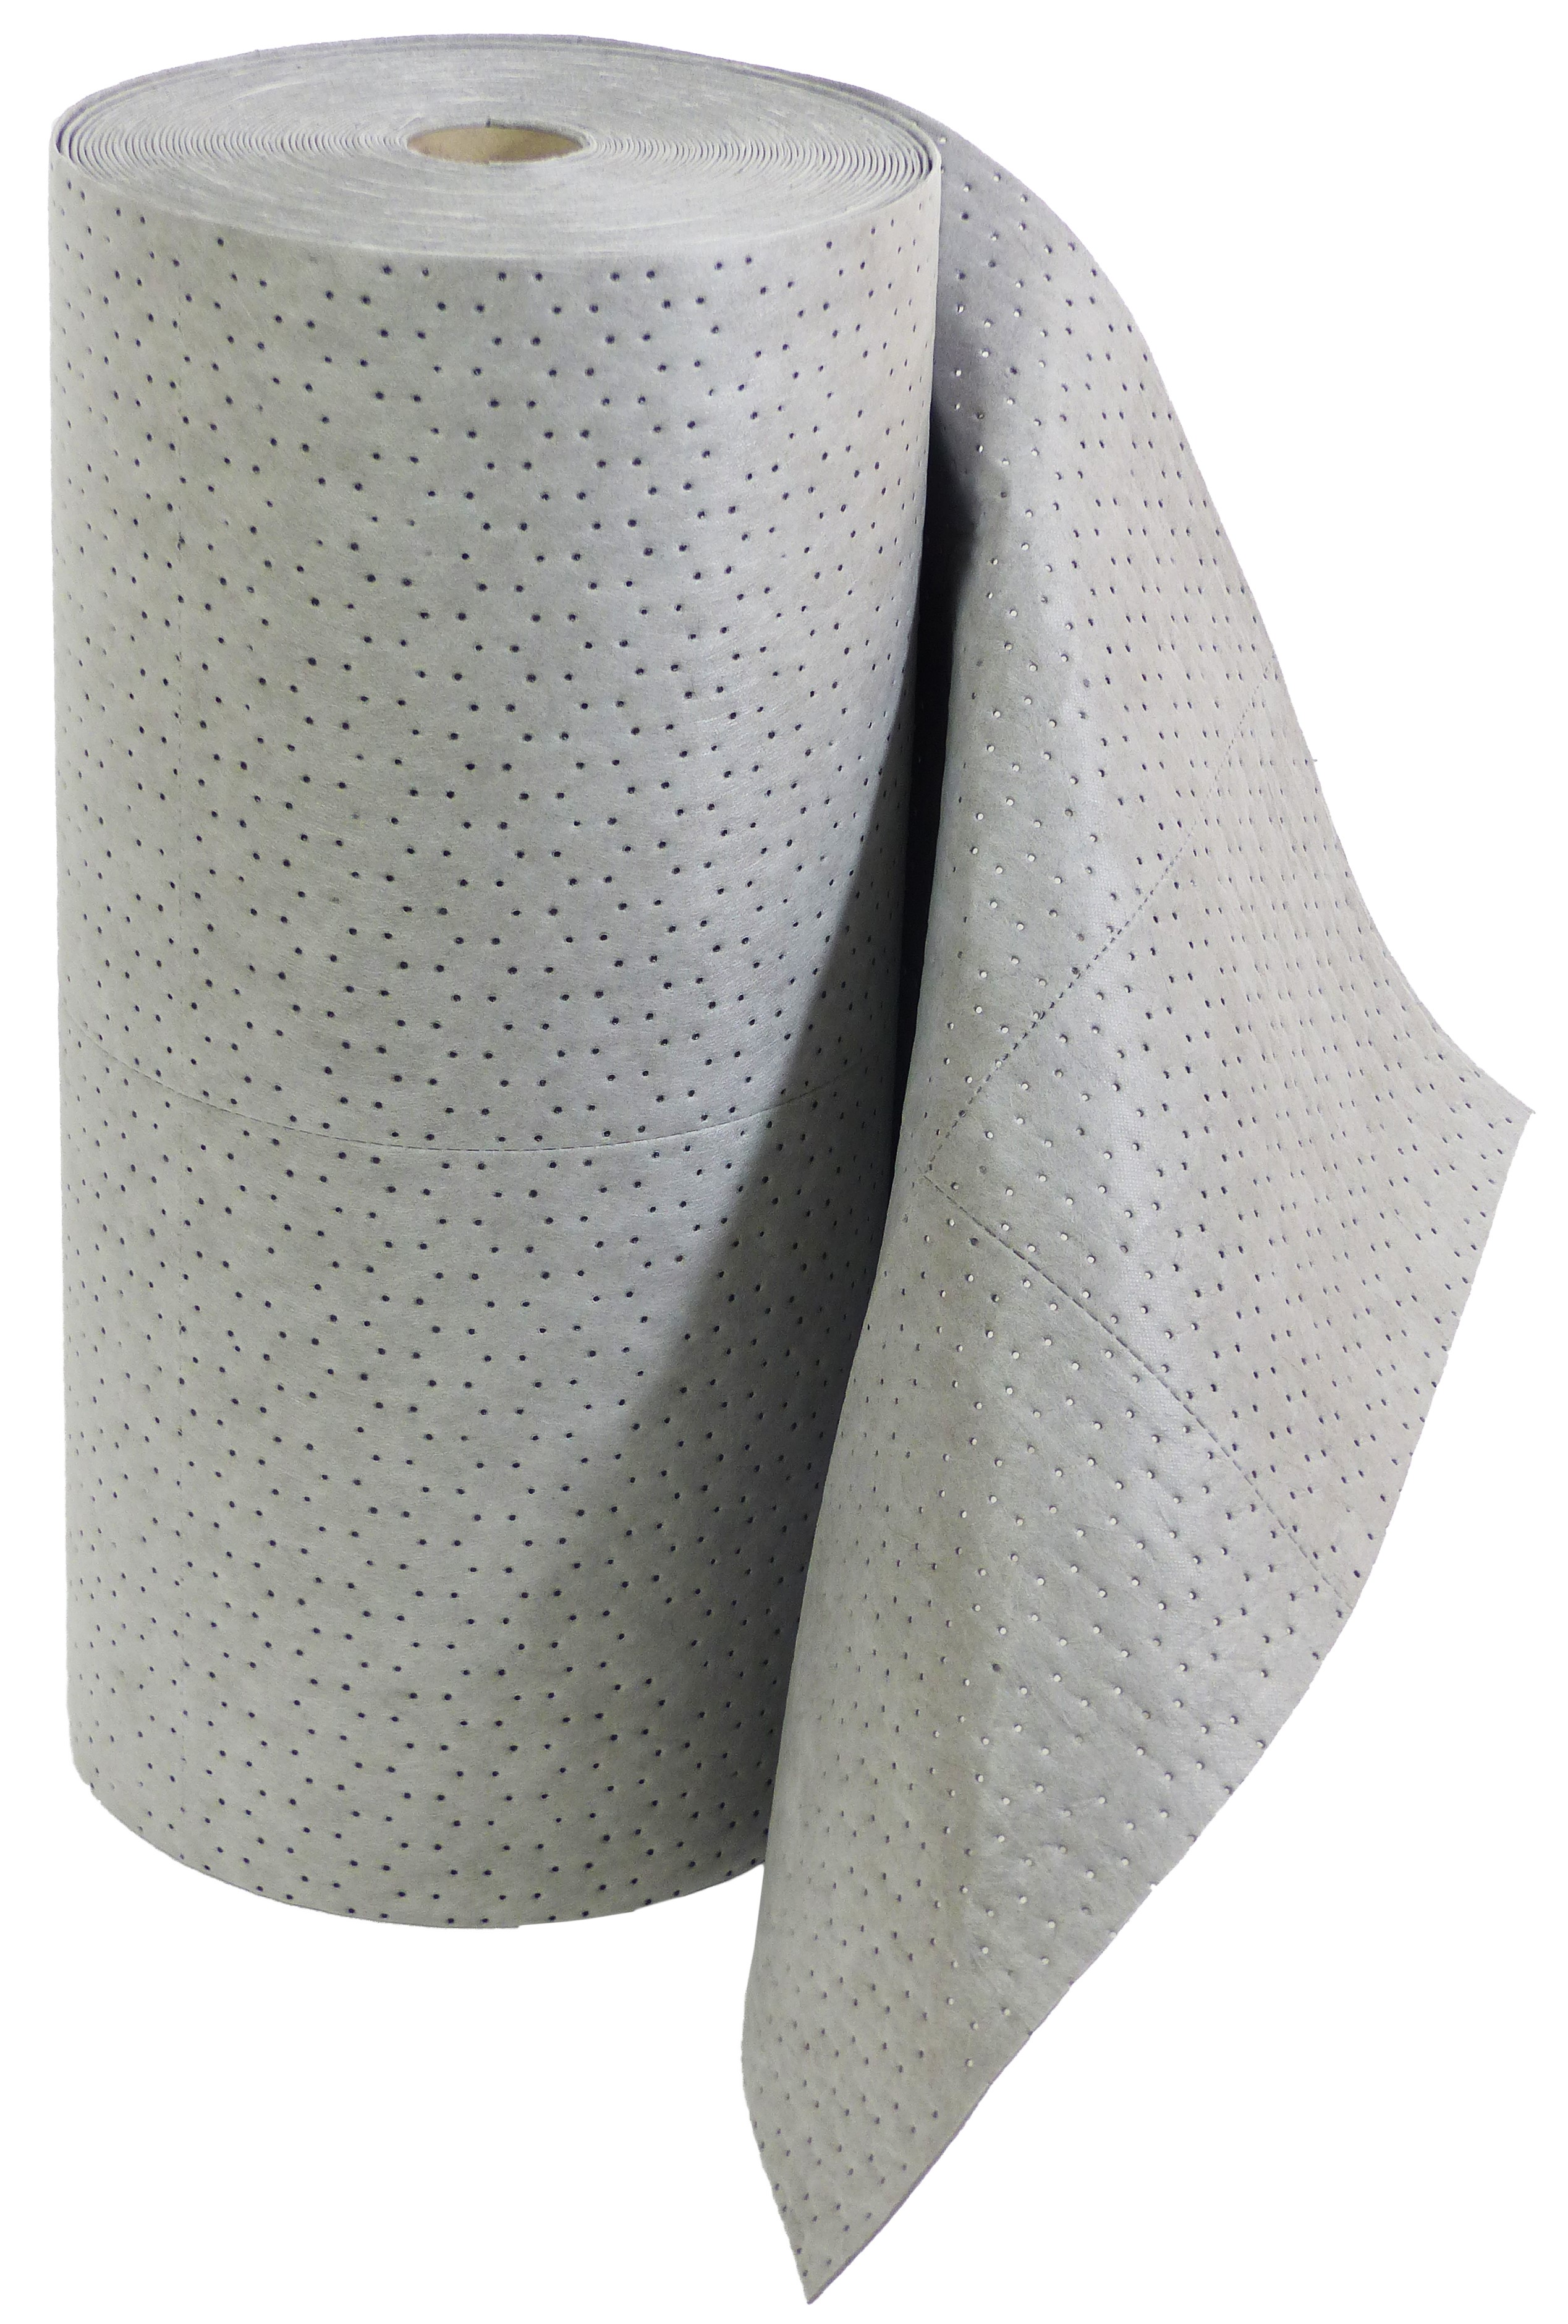 ICOSORB&#174; SMS HEAVY gray as a roll